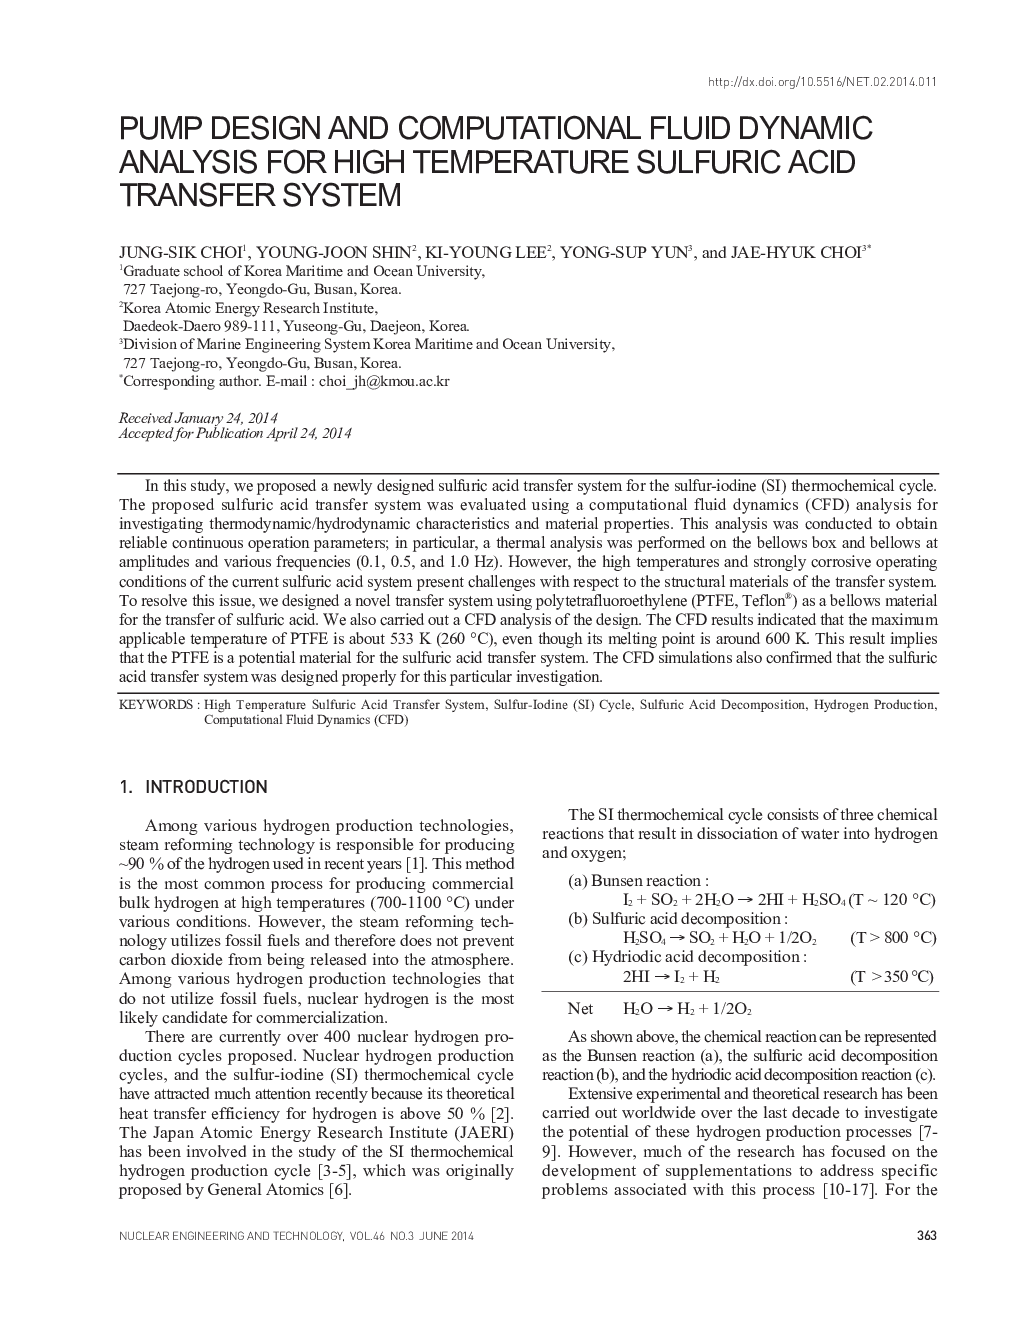 PUMP DESIGN AND COMPUTATIONAL FLUID DYNAMIC ANALYSIS FOR HIGH TEMPERATURE SULFURIC ACID TRANSFER SYSTEM